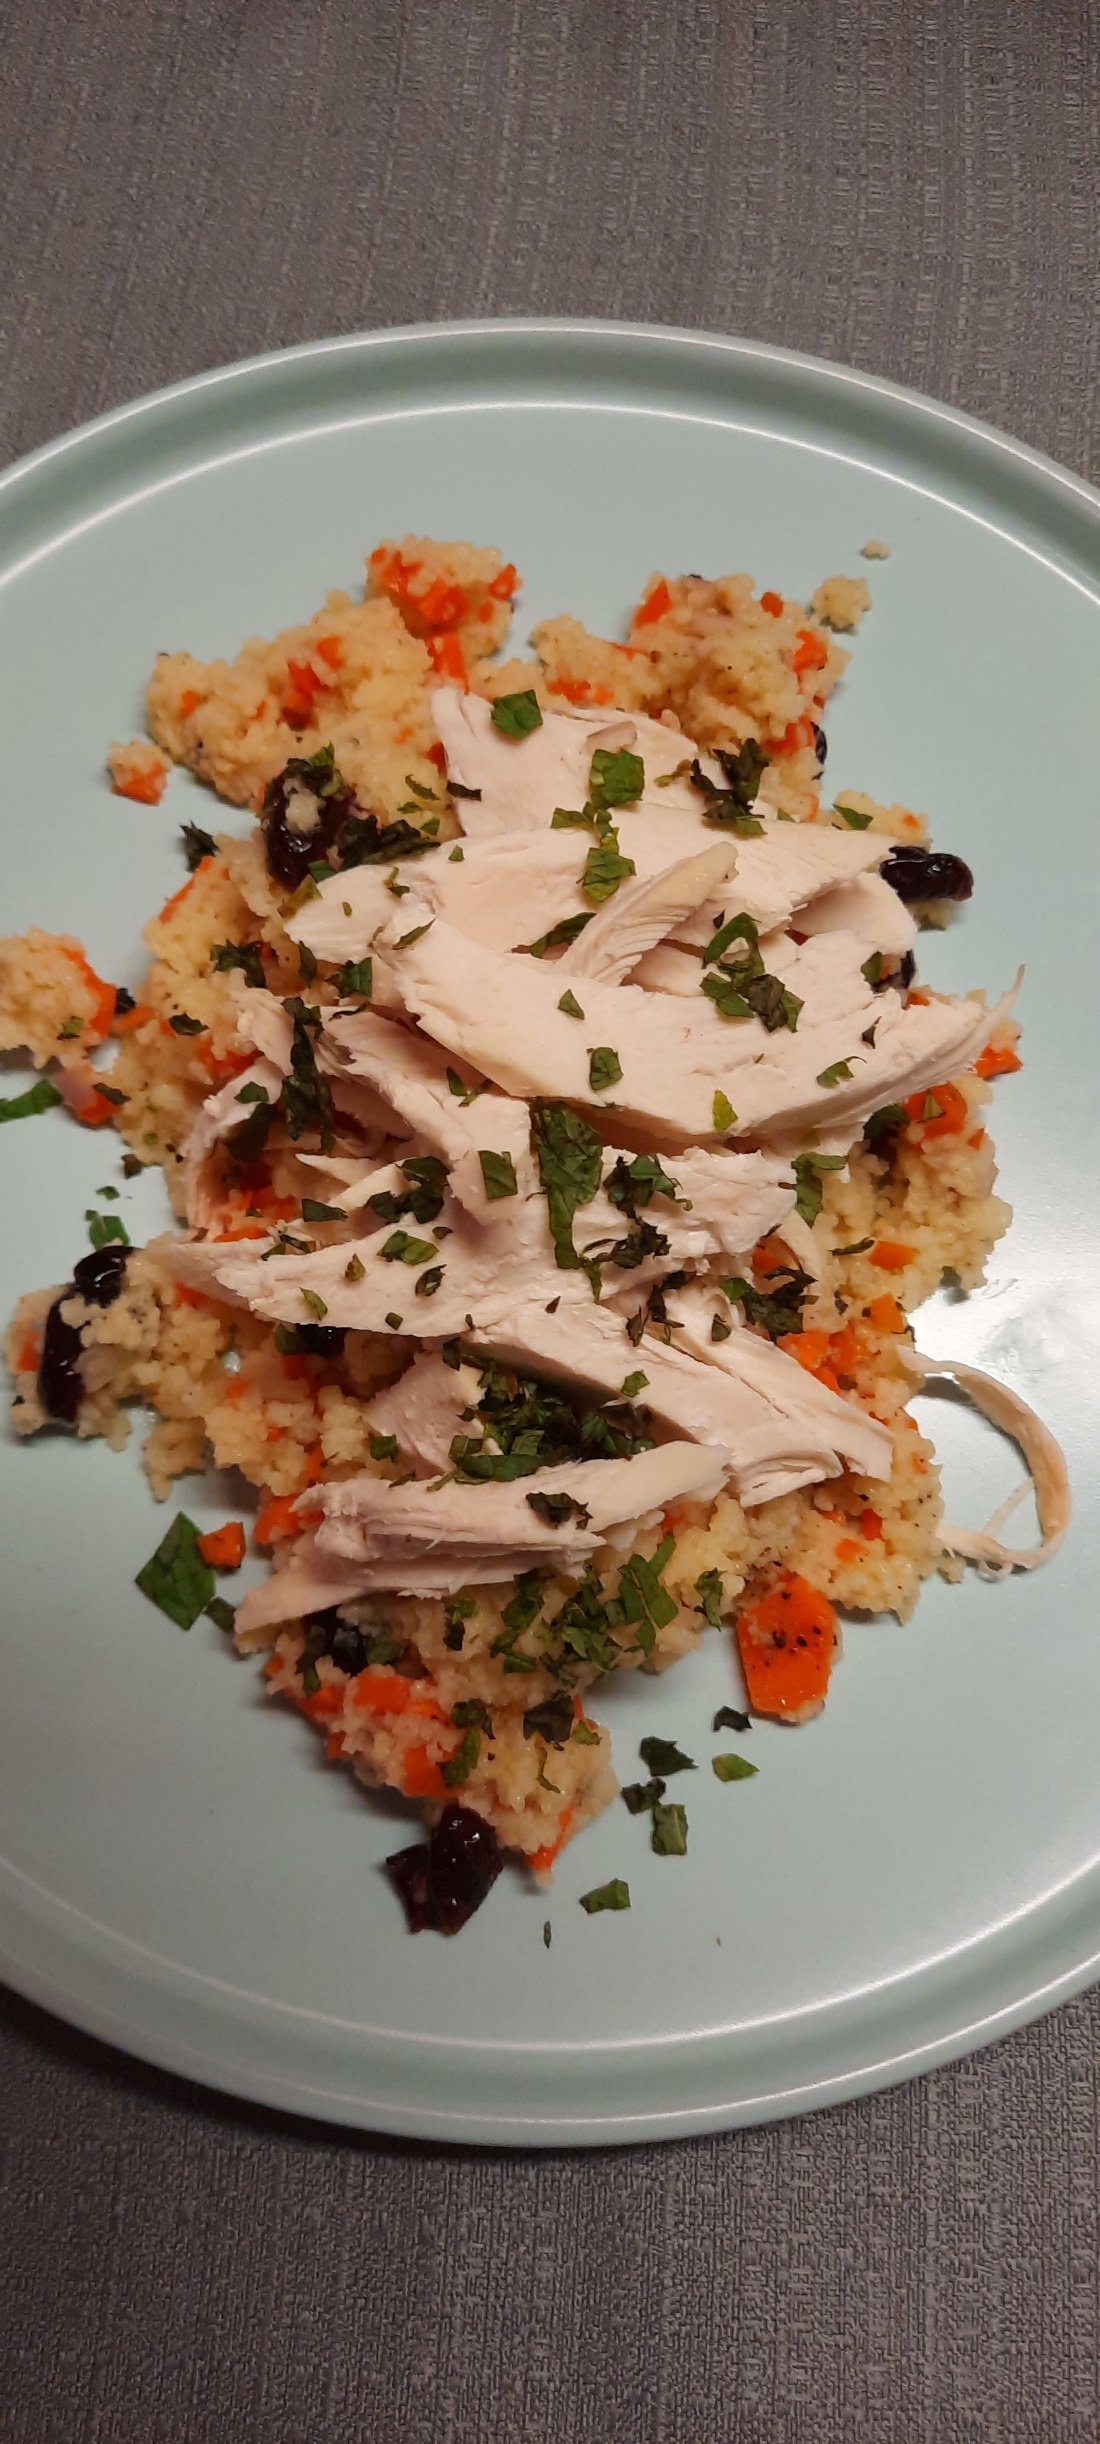 Pg 152 - Slightly sweet couscous 